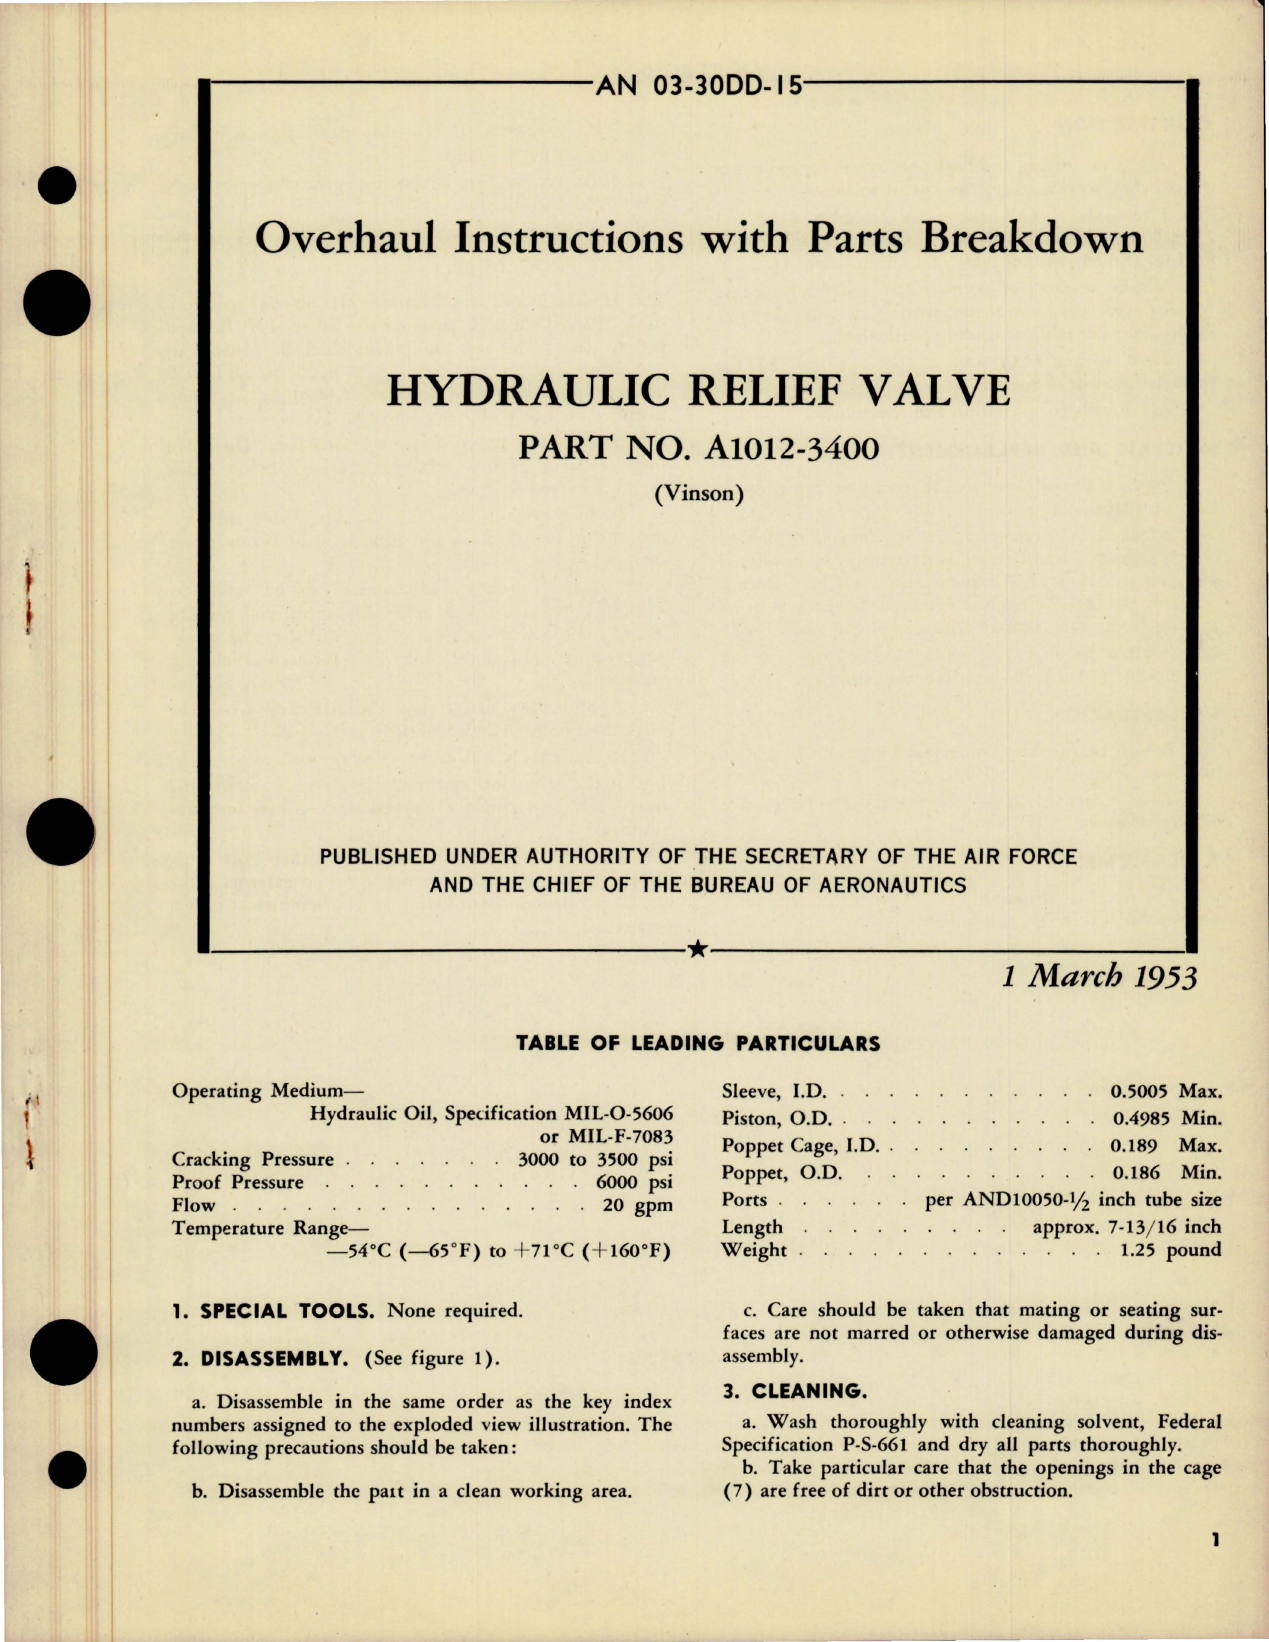 Sample page 1 from AirCorps Library document: Overhaul Instructions with Parts Breakdown for Hydraulic Relief Valve - Part A1012-3400 